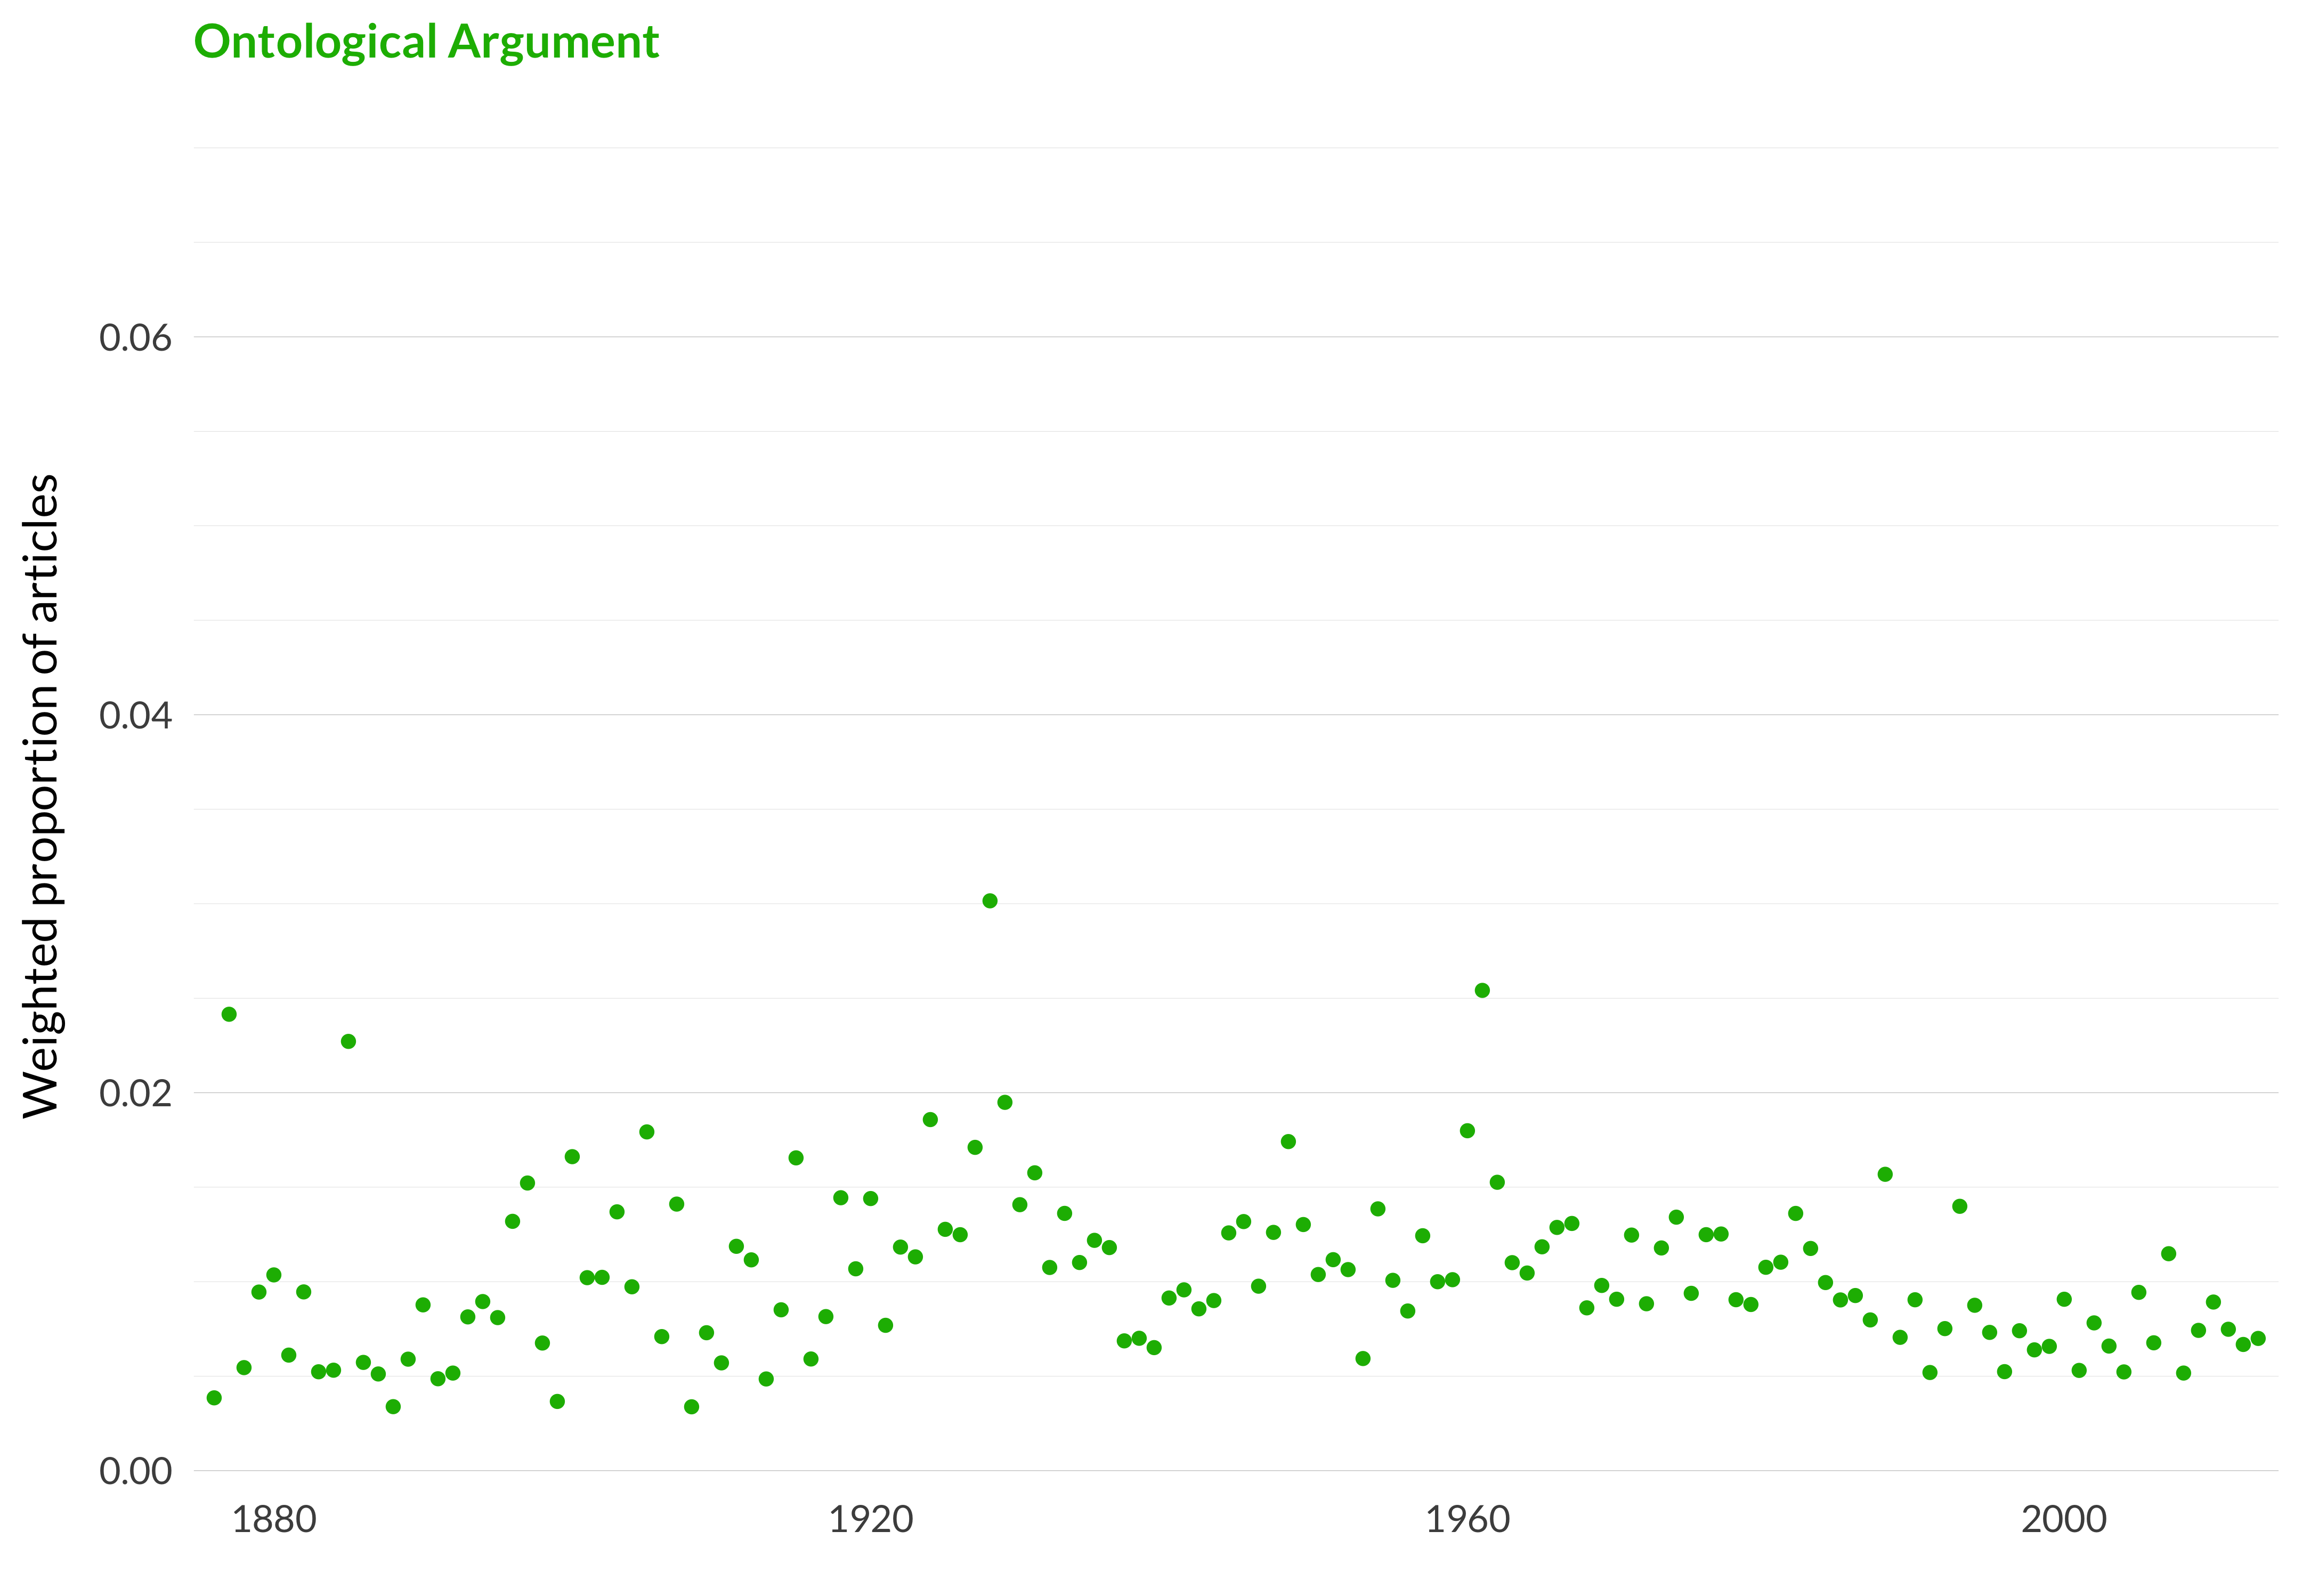 A scatterplot showing which proportion of articles each year are in the ontological argumenttopic. The x-axis shows the year, the y-axis measures the proportion of articles each year in this topic. There is one dot per year. The highest value is in 1928 when 3.0% of articles were in this topic. The lowest value is in 1908 when 0.3% of articles were in this topic. The full table that provides the data for this graph is available in Table A.29 in Appendix A.